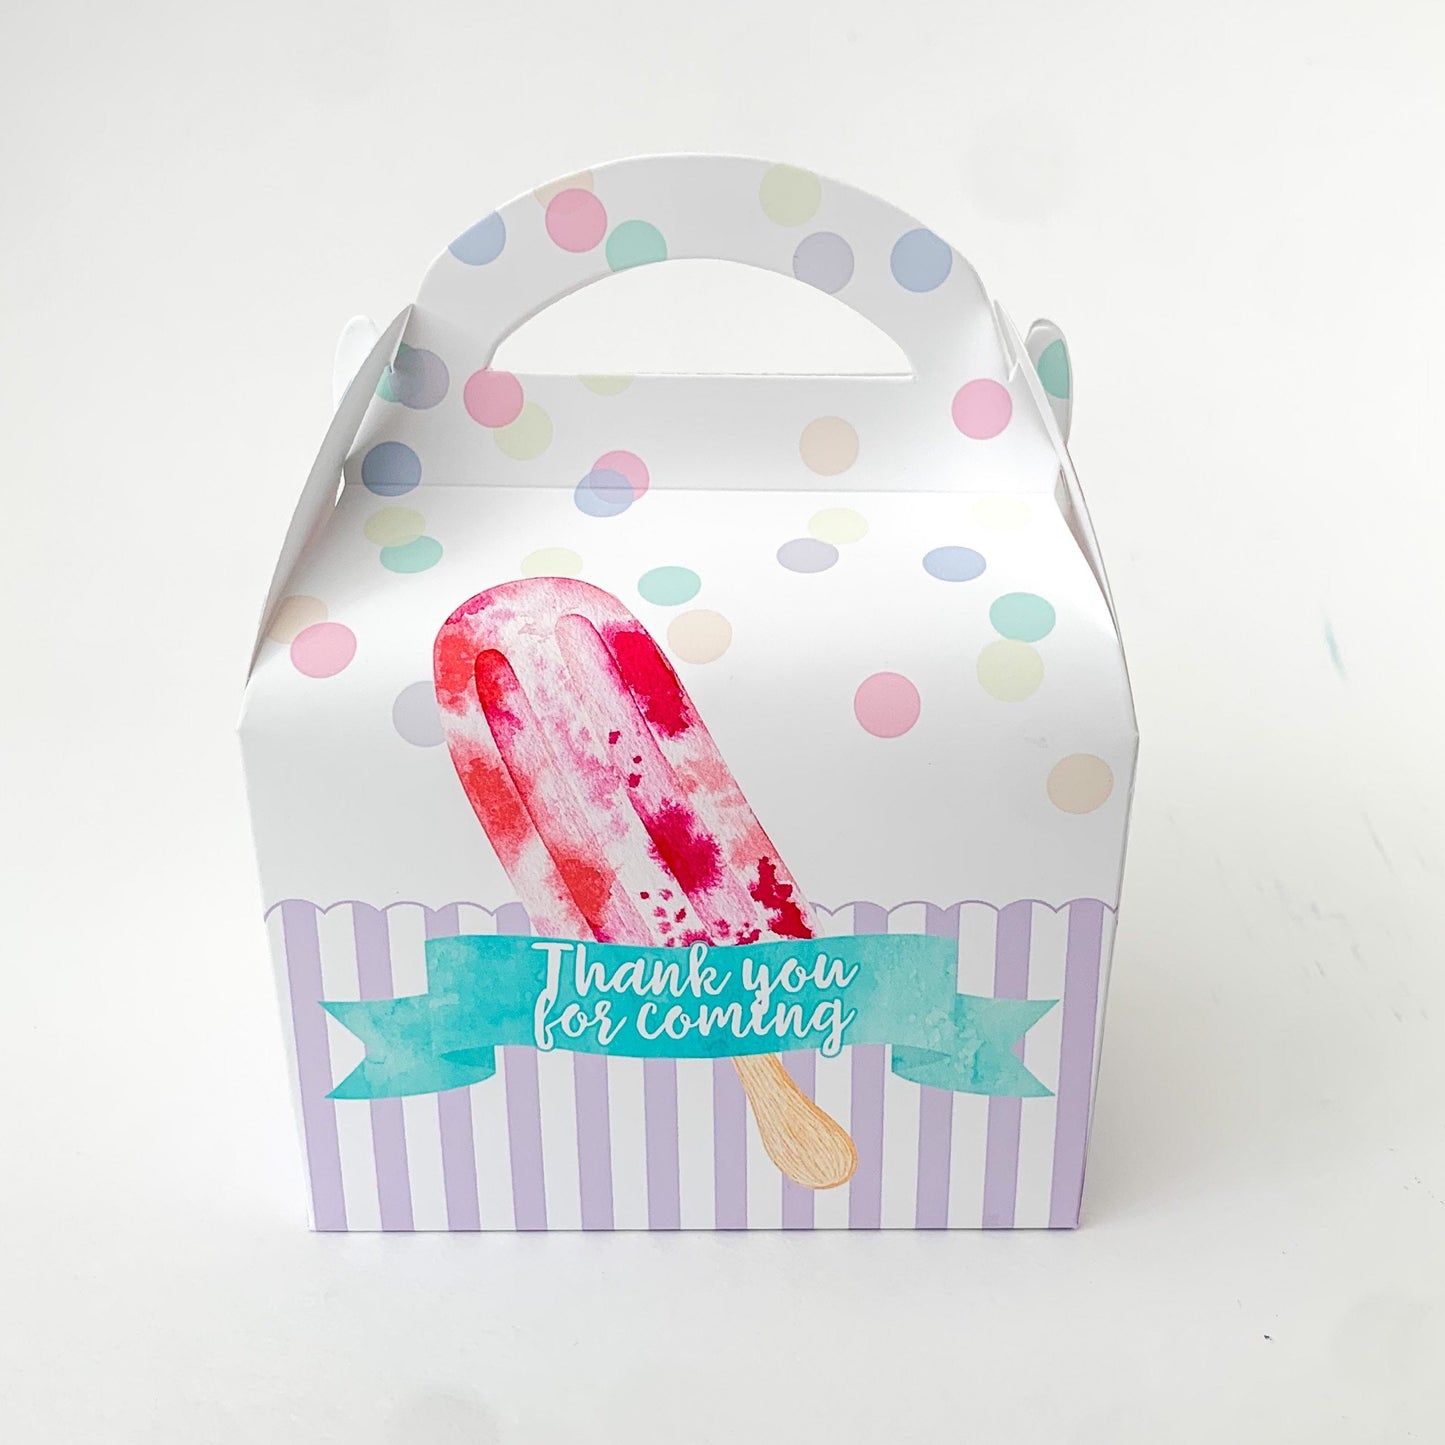 Ice cream and summer daydreams Personalised Children’s Party Boxes